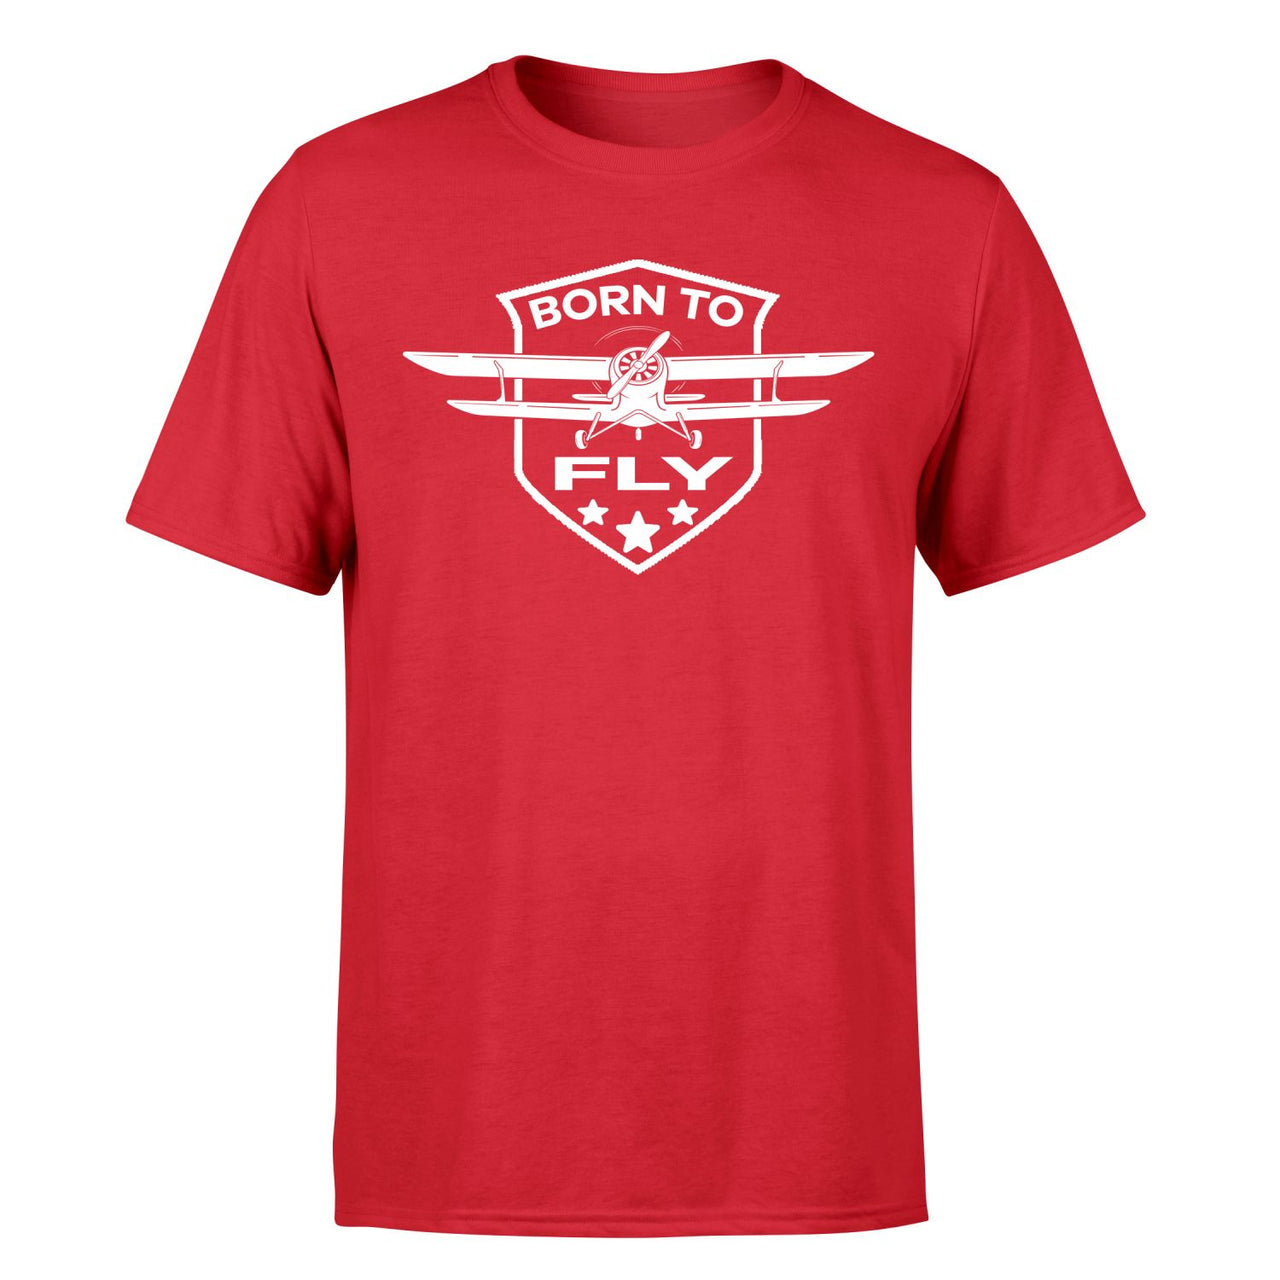 Super Born To Fly Designed T-Shirts